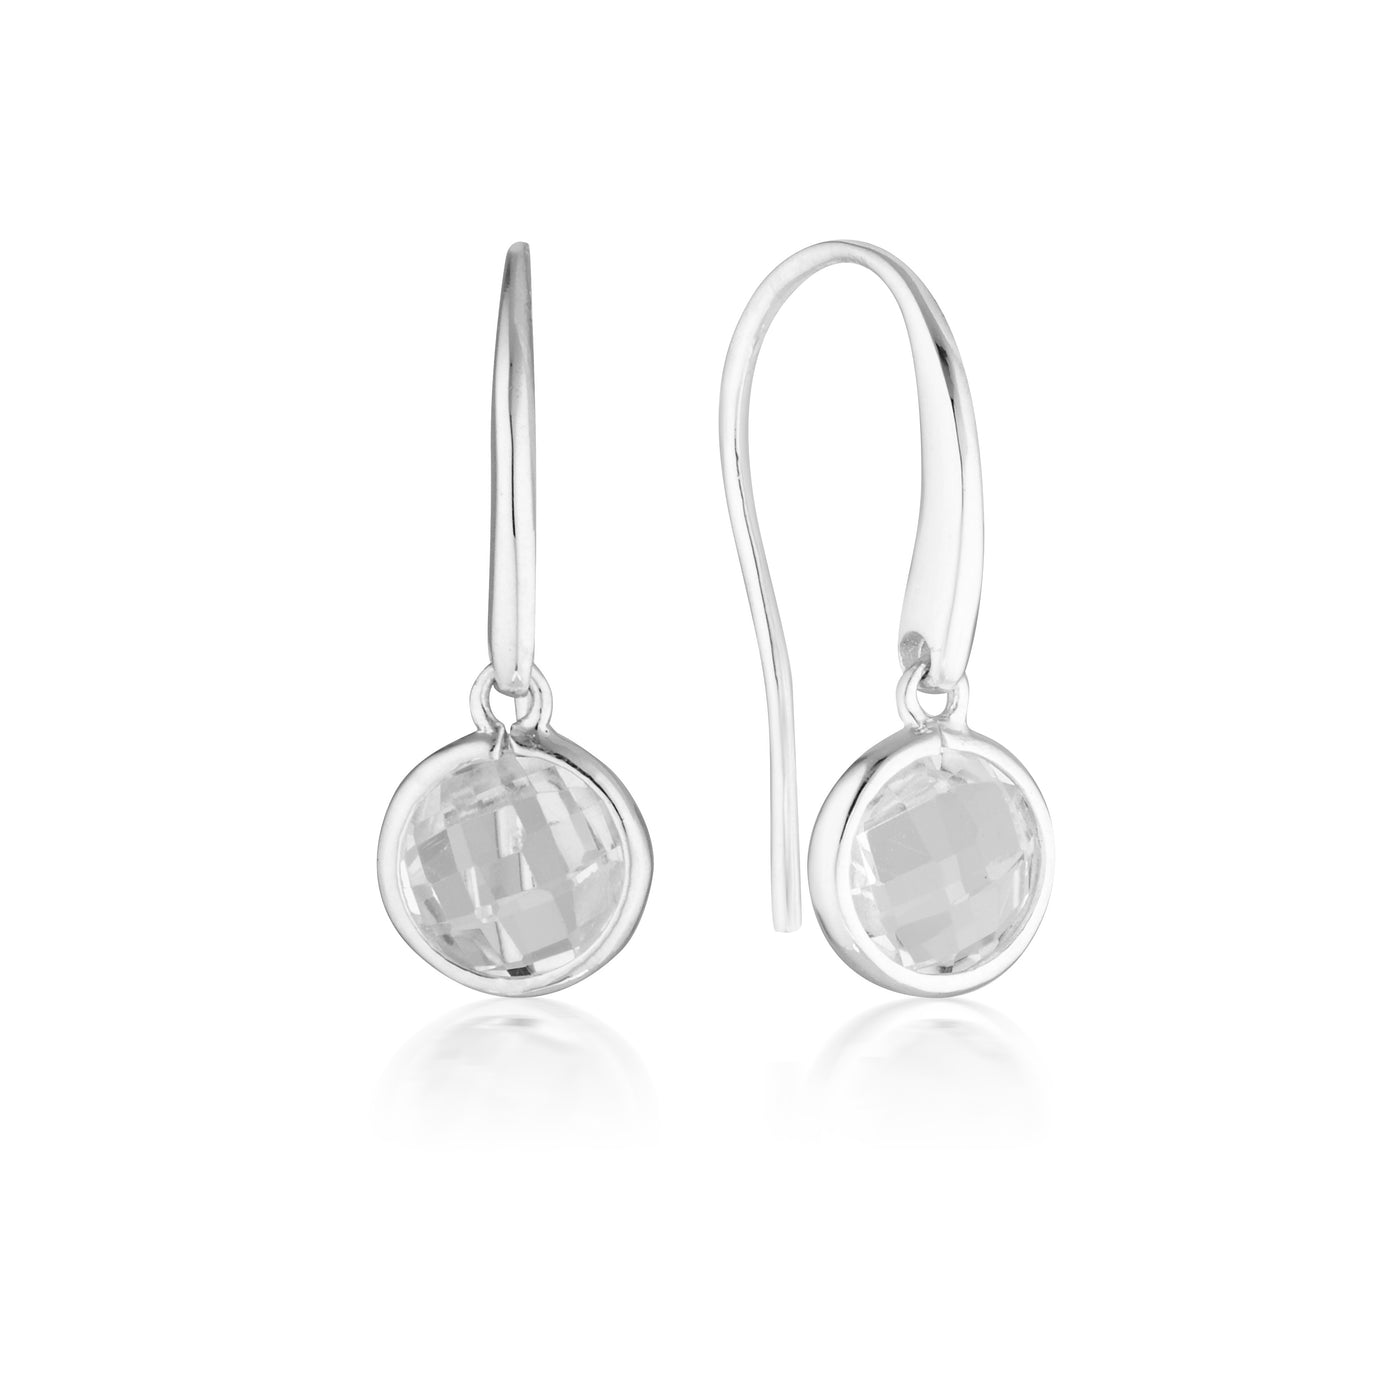 Georgini - Lucent Sterling Silver Cubic Zirconia Drop Earrings Small